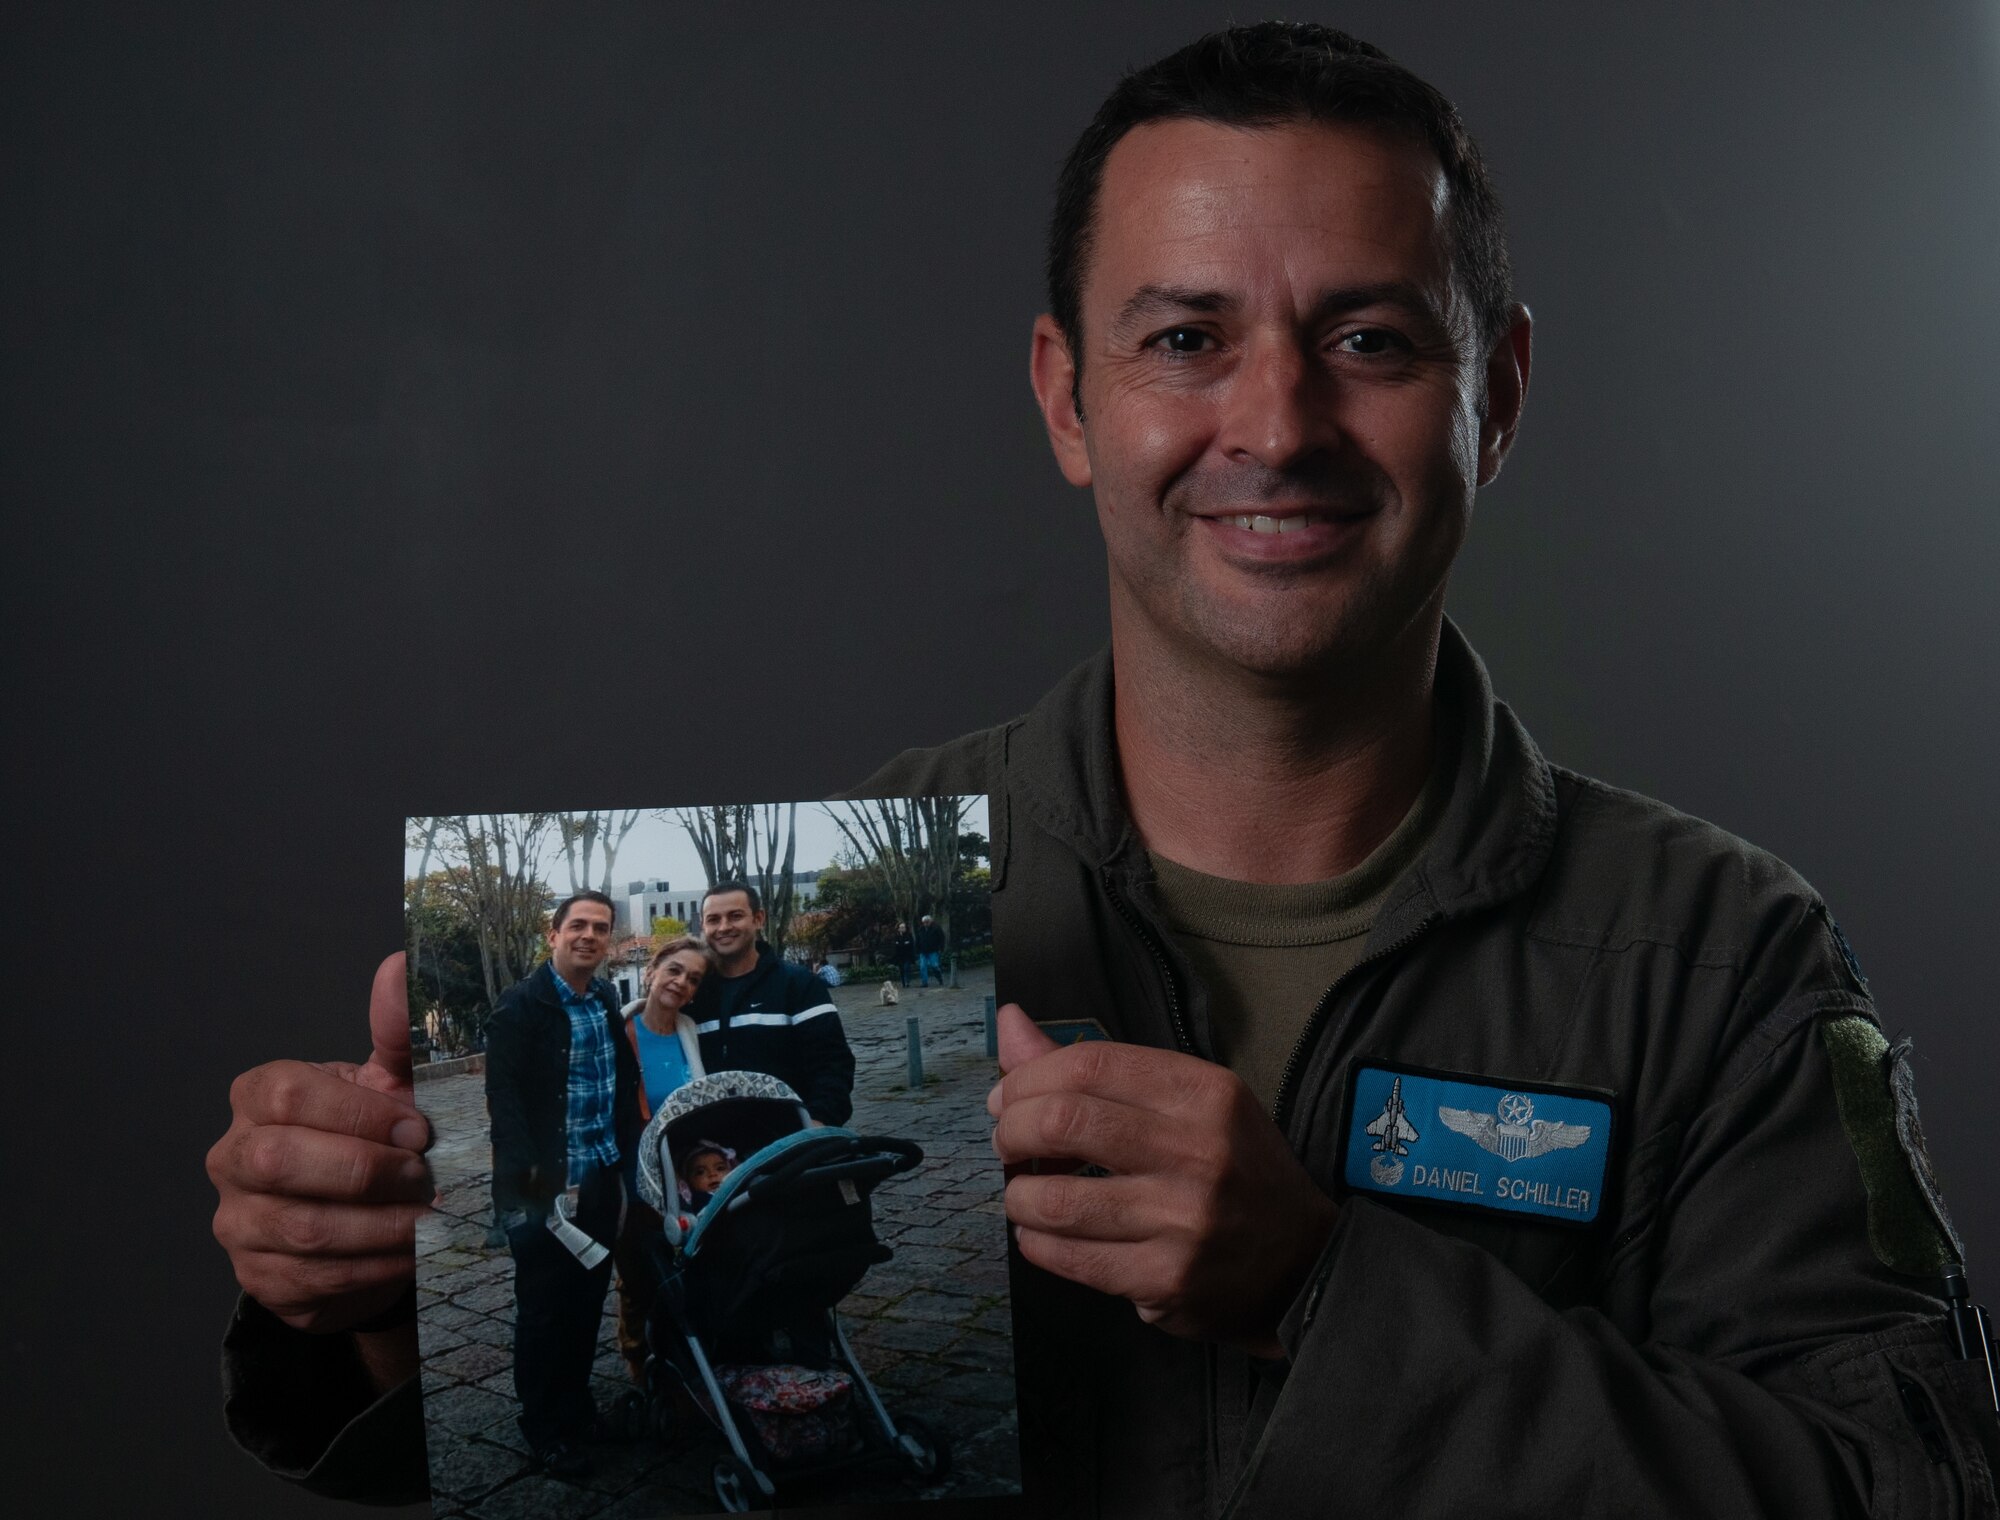 U.S. Air Force Lt. Col. Daniel Schiller, chief of safety and F-15C Eagle pilot at the 125th Fighter Wing, poses with a photo of his biological mother and brother, both from Colombia, at the Jacksonville Air National Guard Base, FL, July 31, 2023. Schiller was adopted by a U.S. couple at a young age and eventually commissioned into the Air Force in 2003. In 2018, he met his birth mother and half-brother for the first time, and in 2023, he will return to Colombia to complete his final tour of duty with the Florida Air National Guard. (U.S. Air National Guard photo by Tech Sgt. Chelsea Smith)